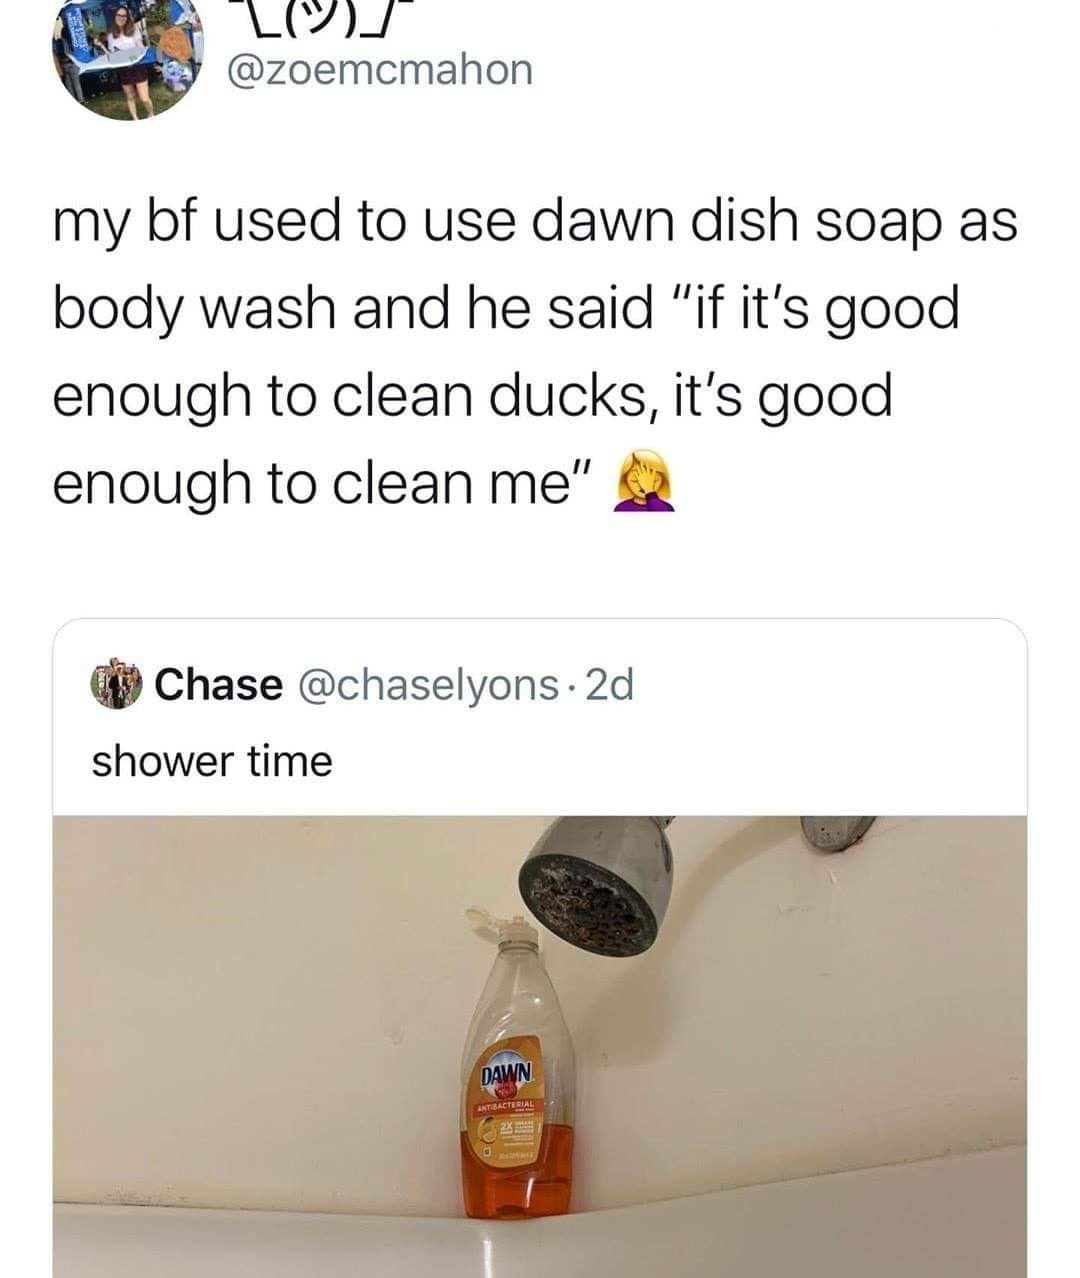 my bf used to use dawn dish soap as body wash and he said "if it's good enough to clean ducks, it's good enough to clean me" Chase . 2d shower time Dawn Antibacterial